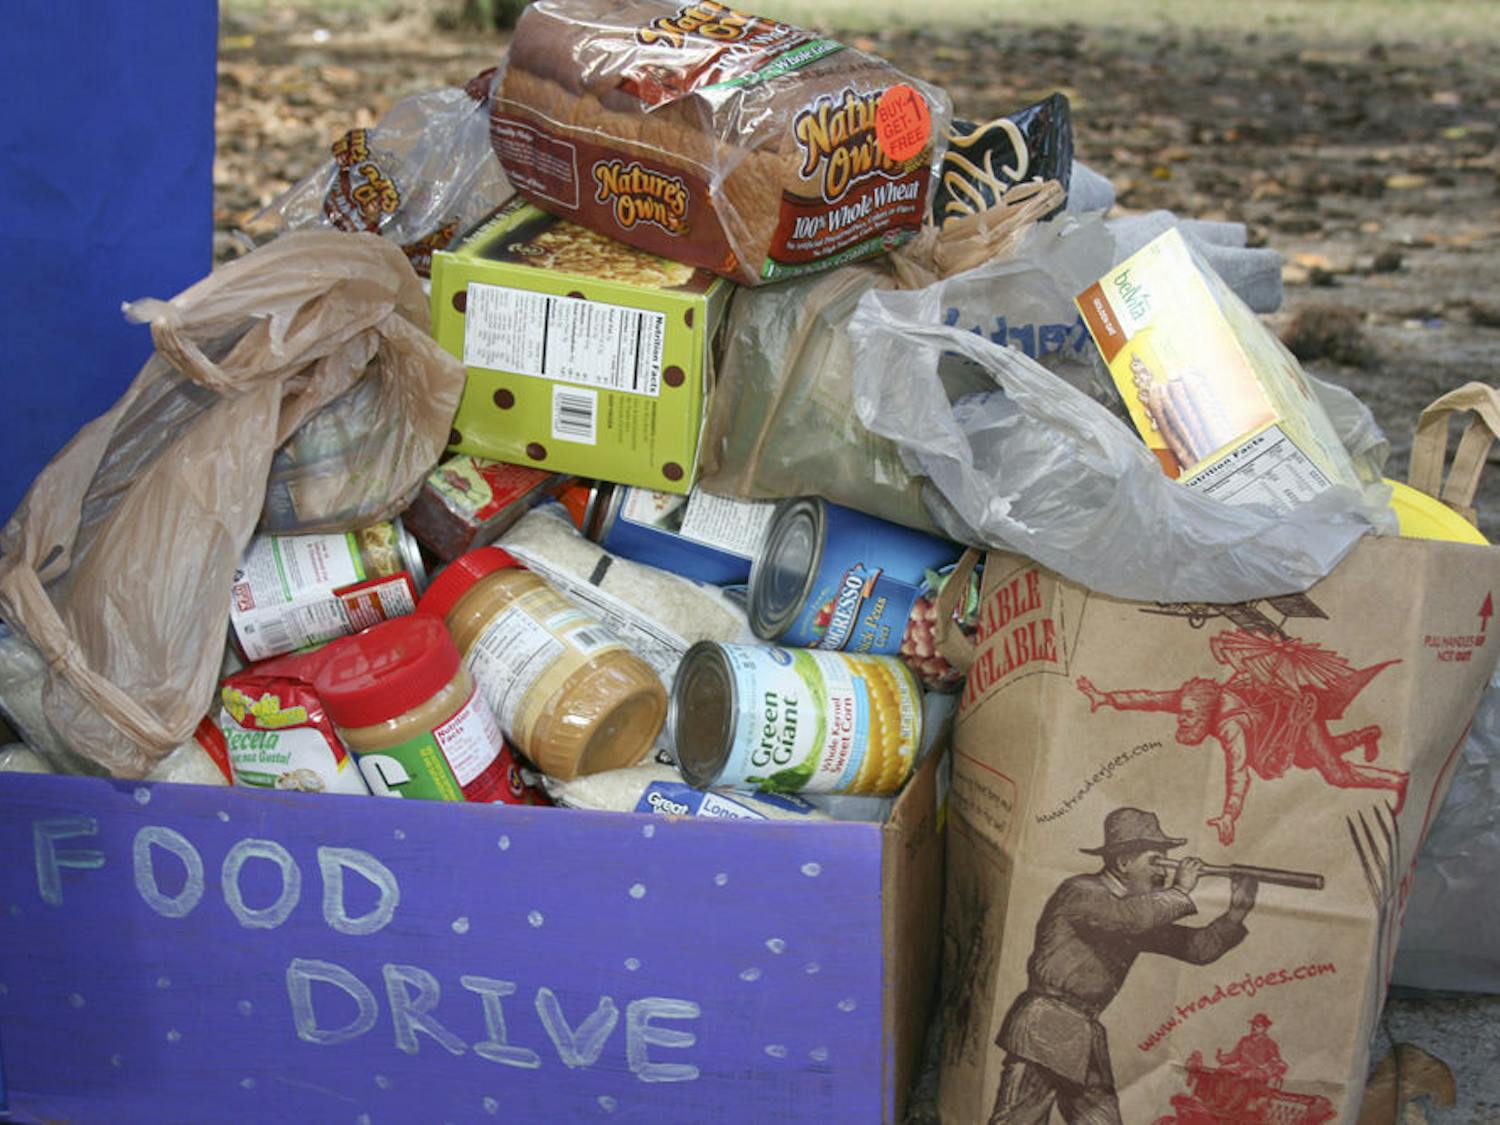 The Member Leadership Program, the Hispanic Student Association and the Rural Women's Health Project held a food drive on the Plaza of the Americas on Nov. 17, 2015. They collected food to give 20 migrant farmworker families a happy Thanksgiving.